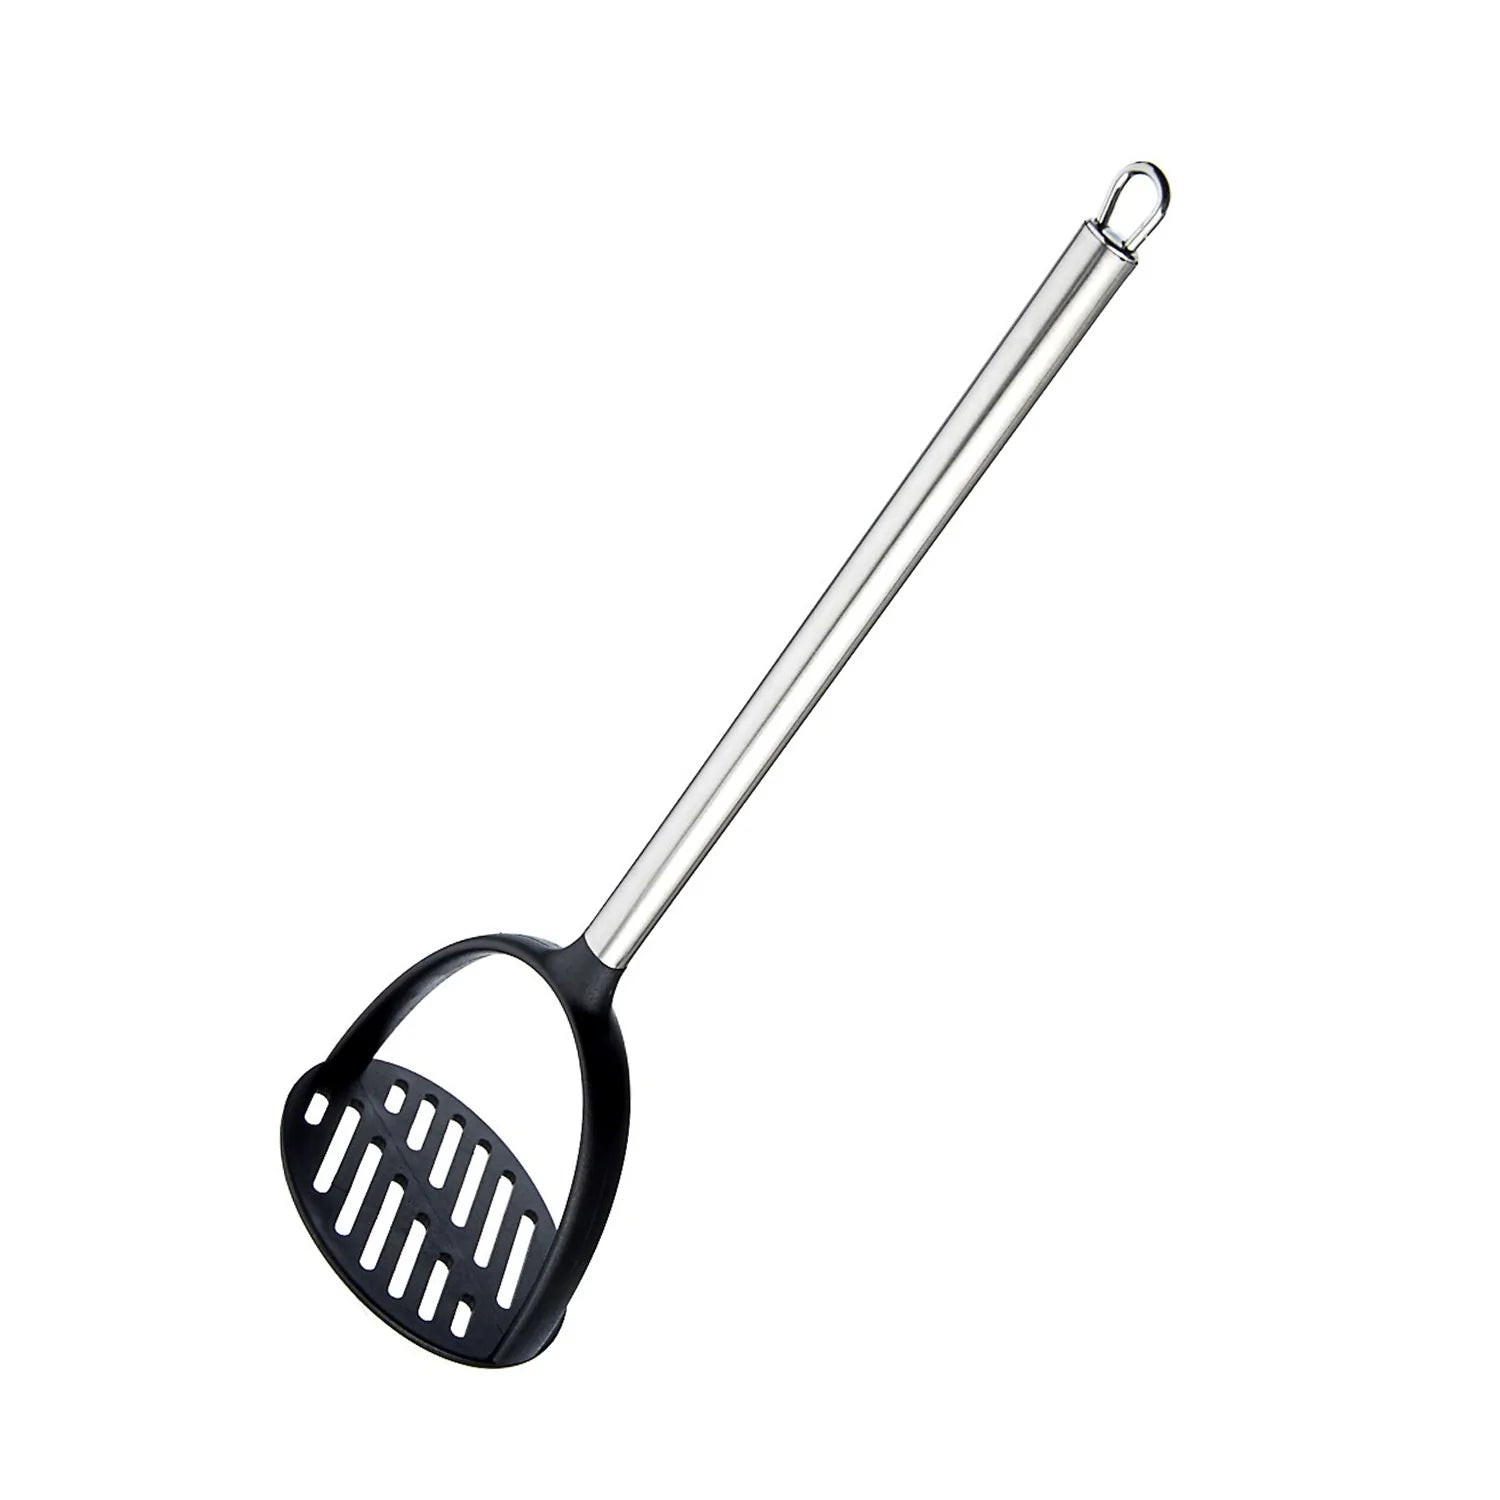 7110 Food Masher With Steel Handle For Cooking Use ( 1 pcs ) 